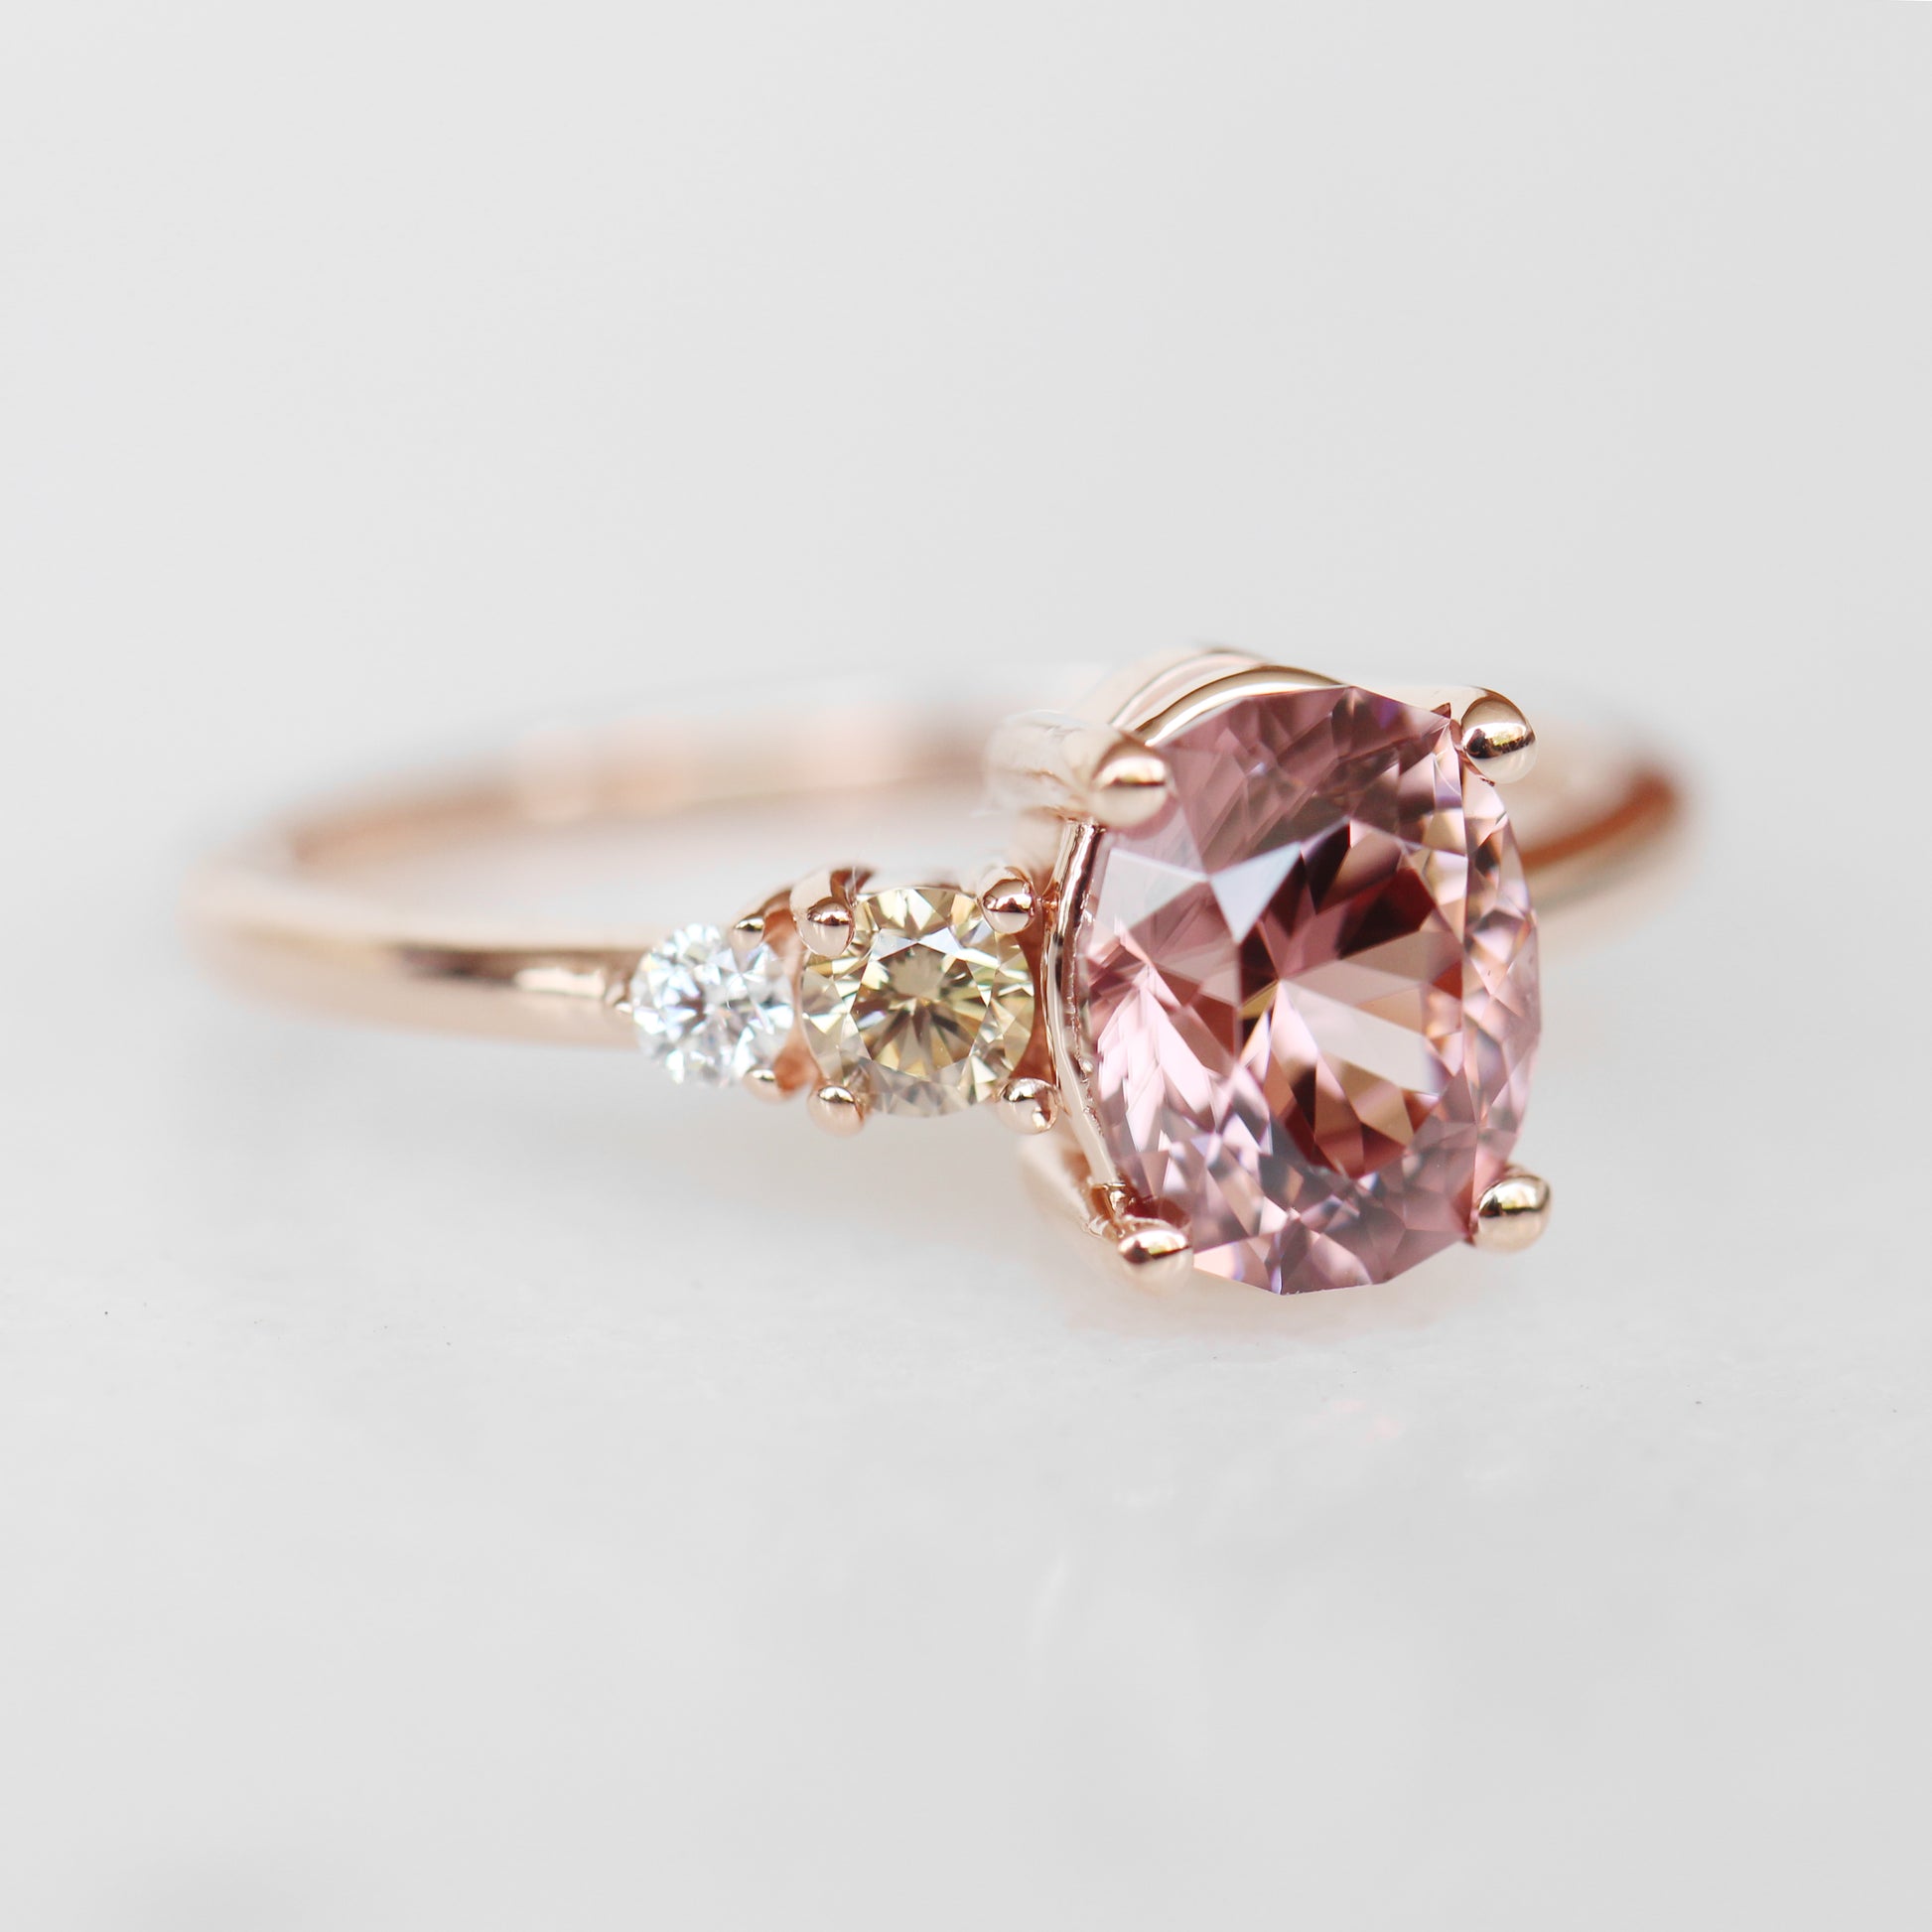 Jesse Ring with 2.04 ct Zircon and Diamonds in 10k rose gold - ready to size and ship - Midwinter Co. Alternative Bridal Rings and Modern Fine Jewelry